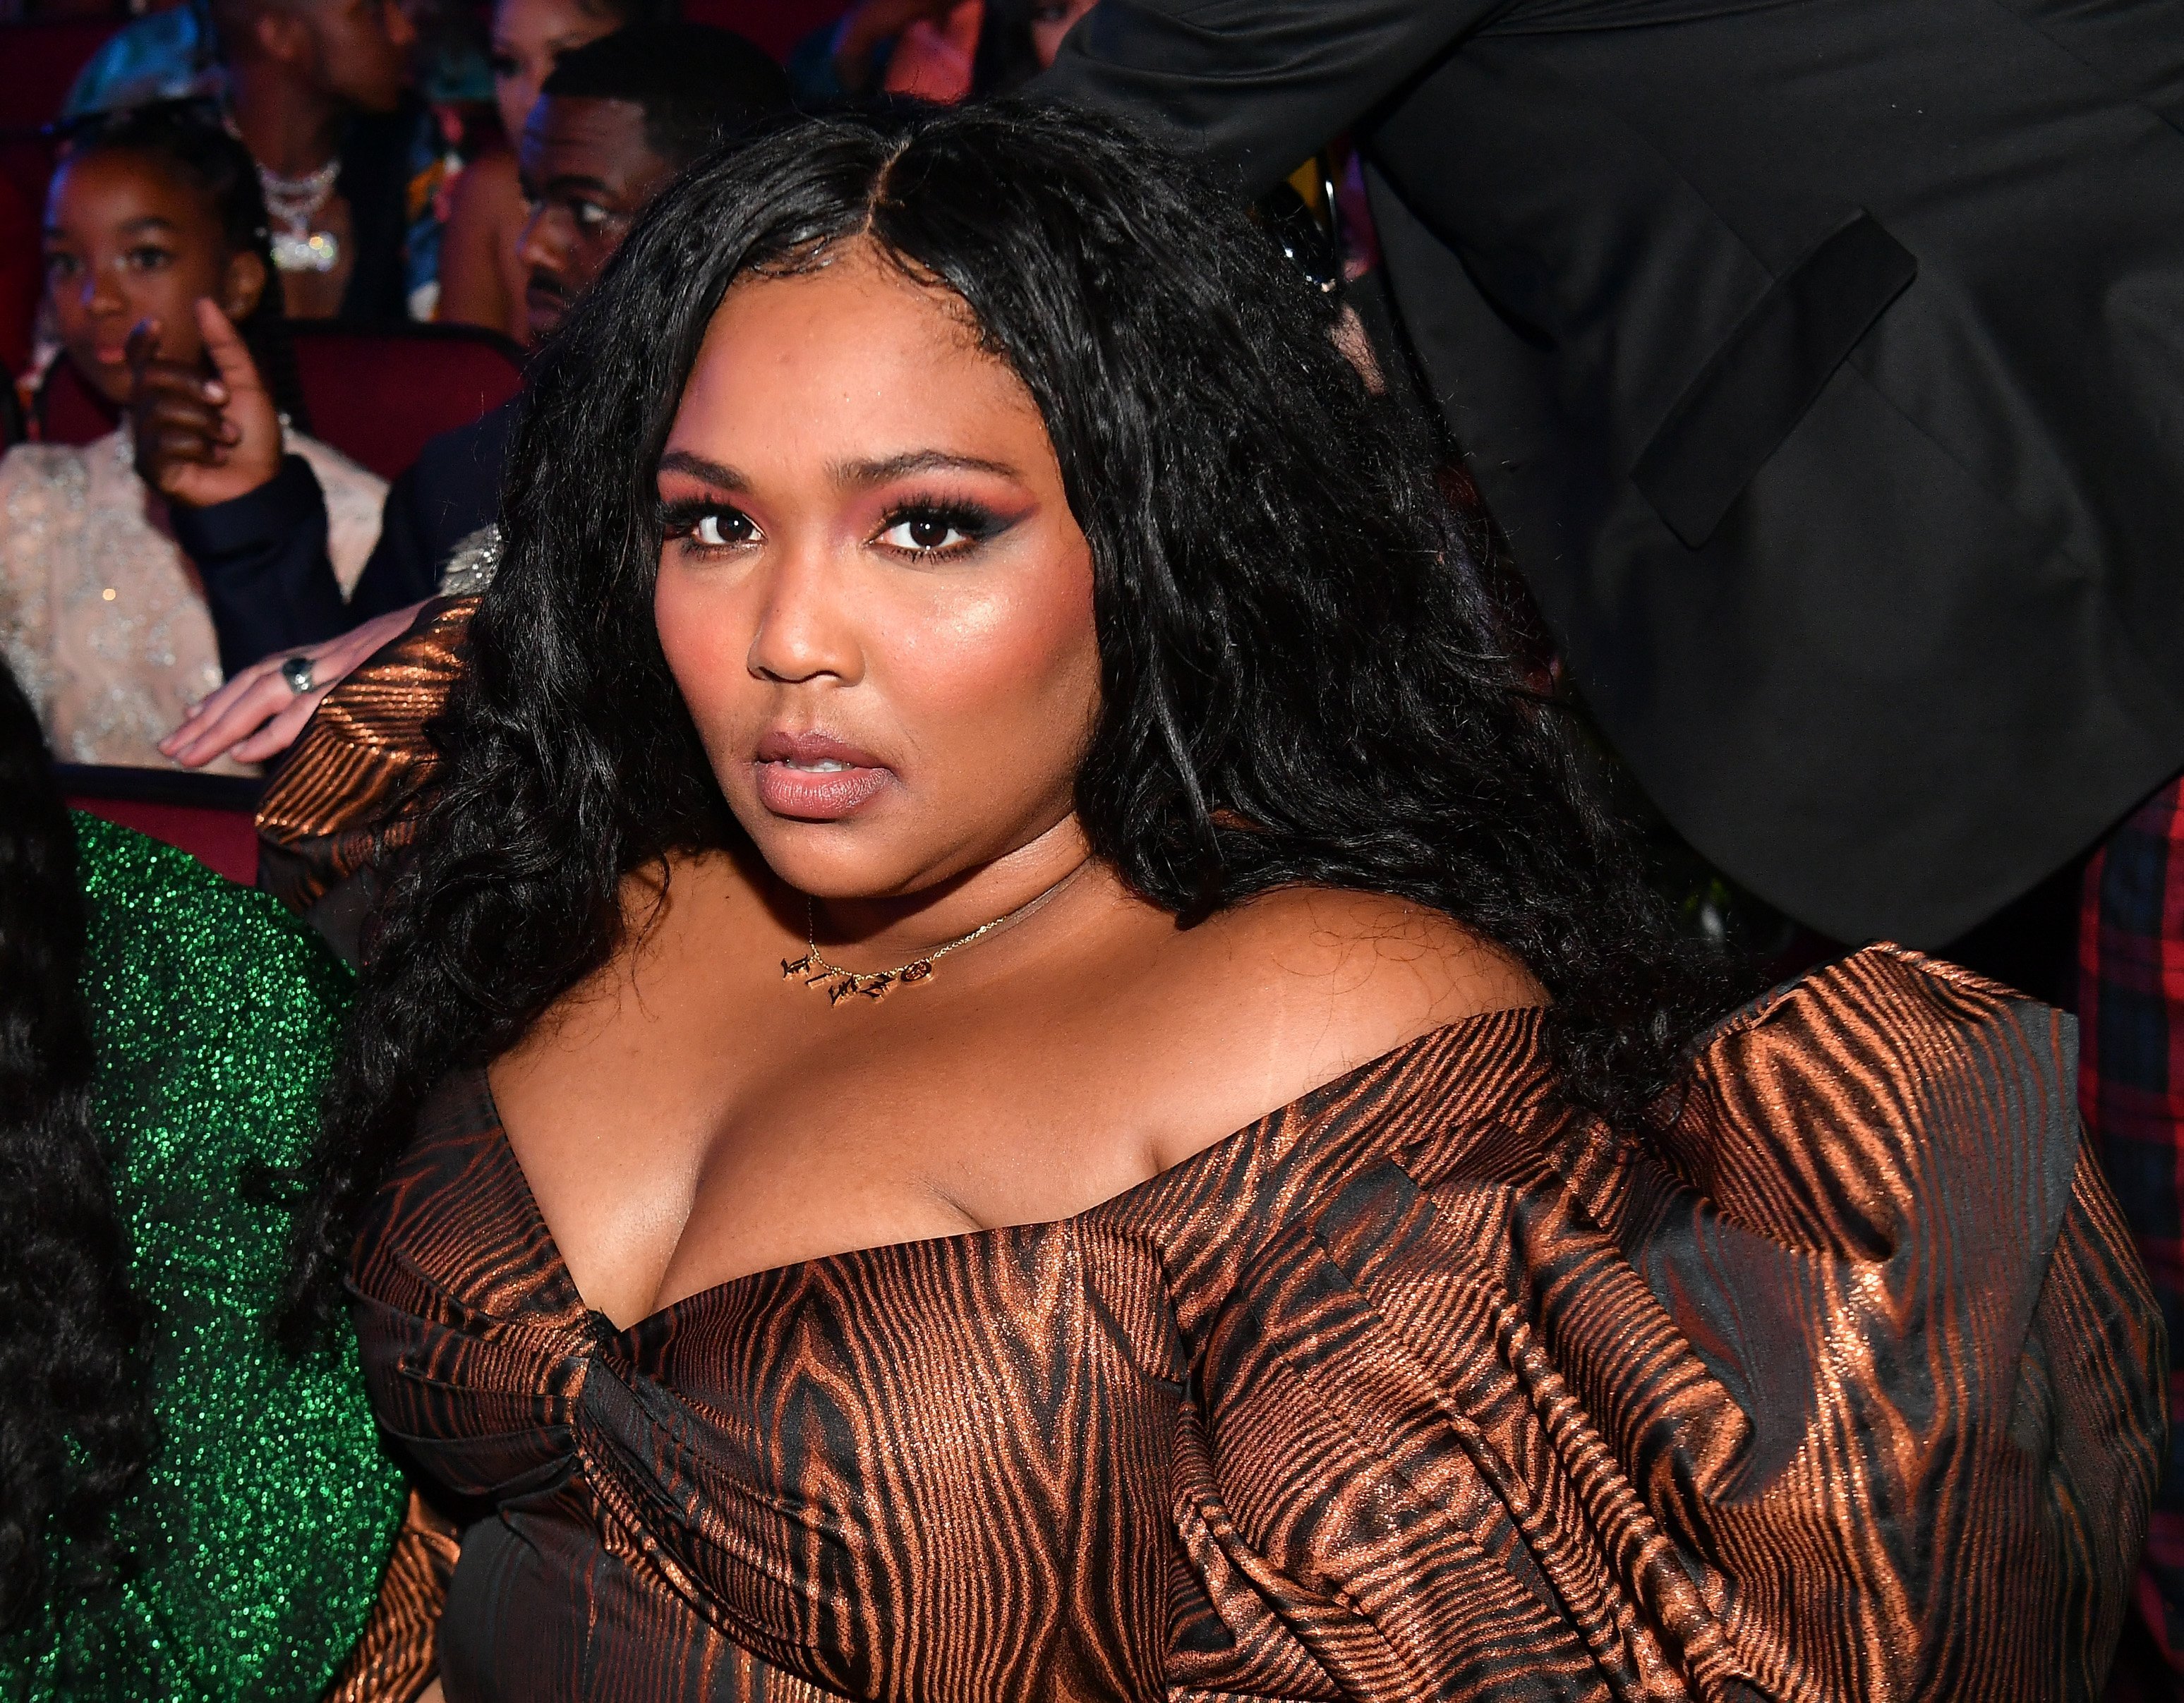 Lizzo during the BET Awards on June 23, 2019 in California | Photo: Getty Images